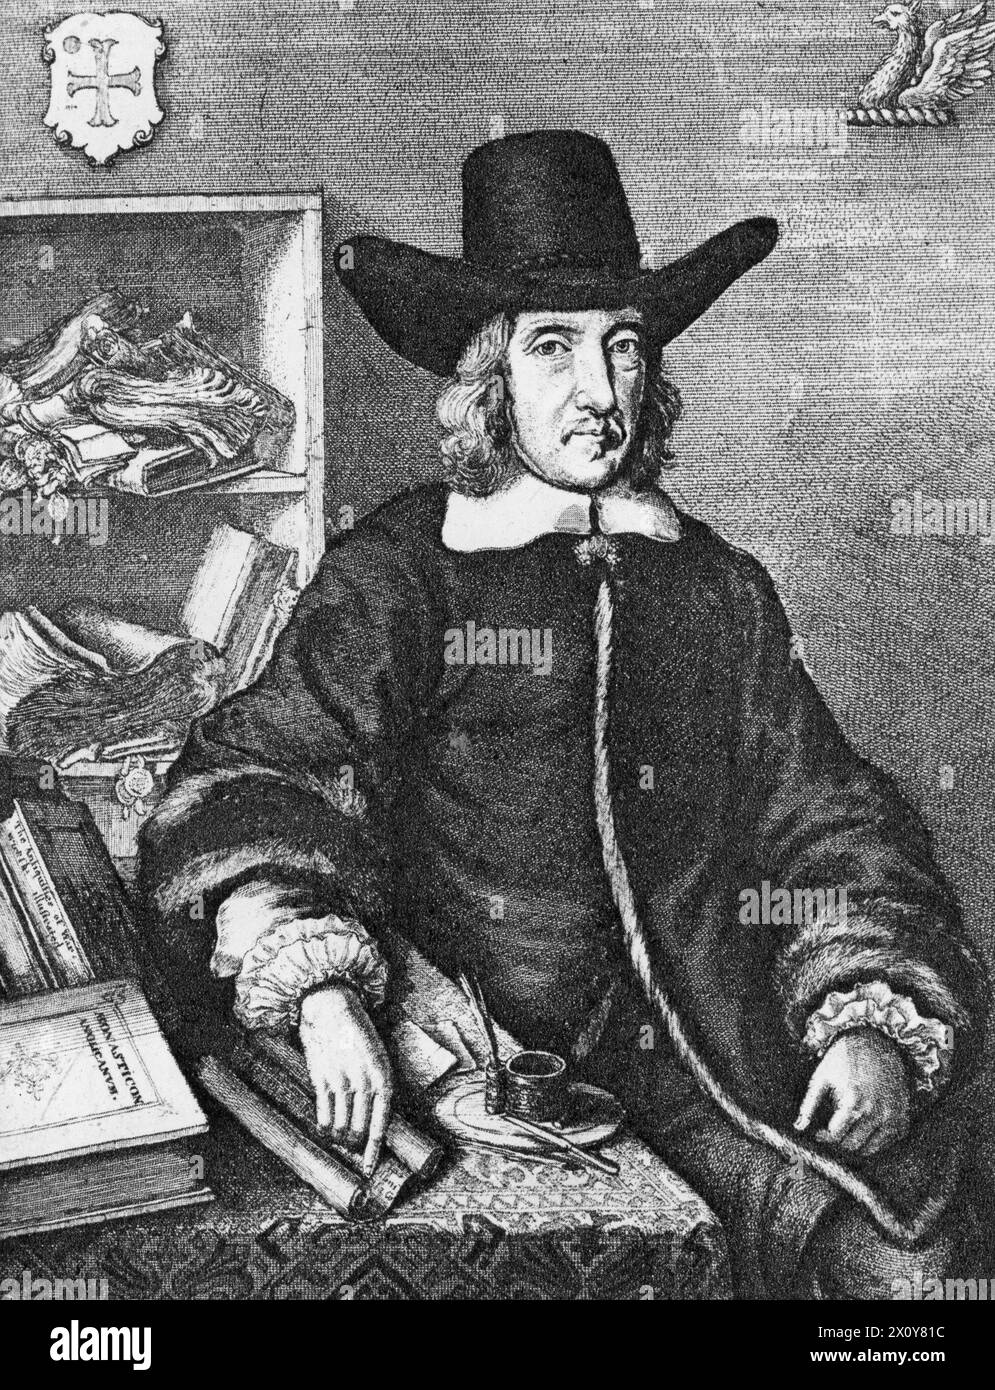 Sir William Dugdale (1605-1686), 1656. By Wenceslaus Hollar (1607-1677). Dugdale was an English antiquary and herald. As a scholar he was influential in the development of medieval history as an academic subject. From the frontispiece of 'The Antiquities of Warwickshire Illustrated', 1656. Stock Photo